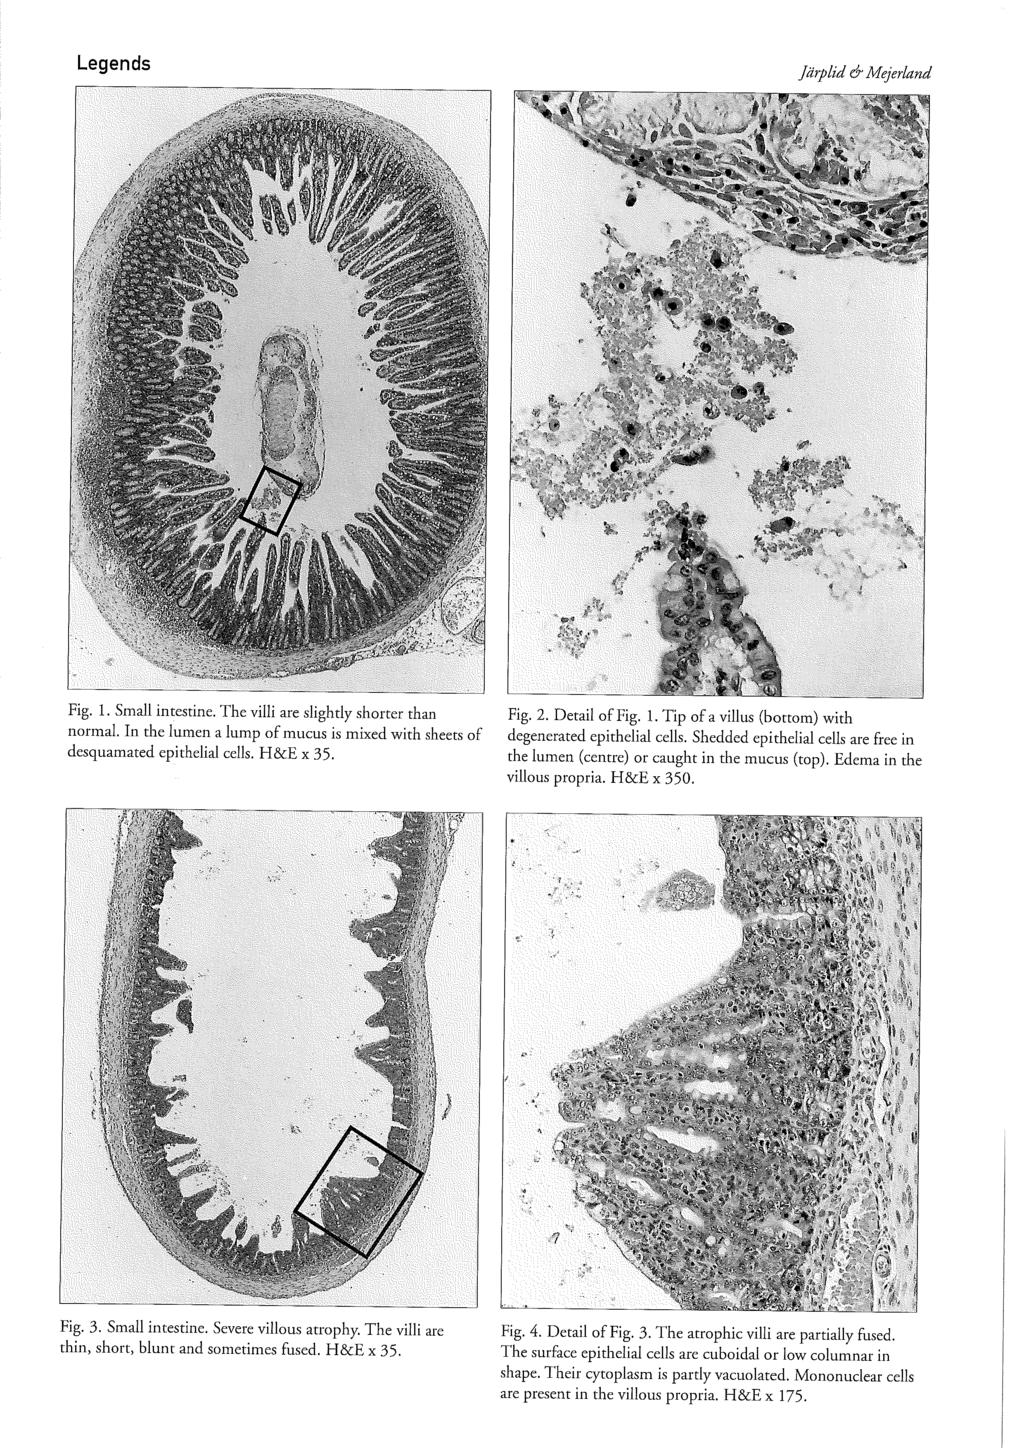 Legends jurplid & Mejerland Fig. 1. Smal1 intestine. The villi are slightly shorter than normal. In the lumen a lump of mucus is mixed with sheets of desquamated epithelial cells. H&E x 35. Fig. 2.